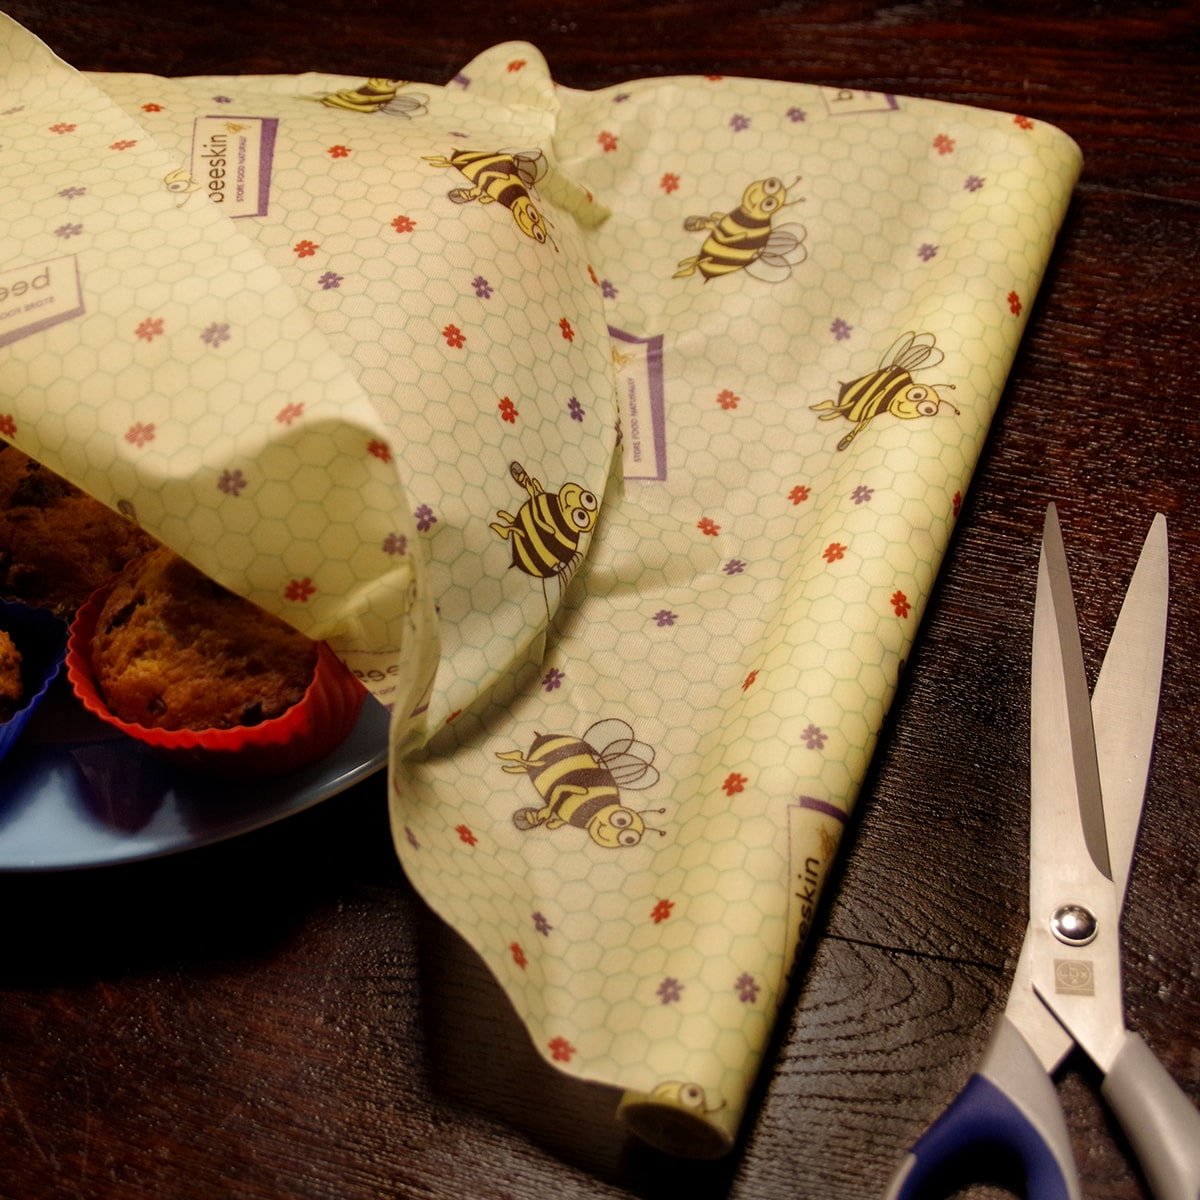 beeskin beeswax roll little bees covering a plate with muffins on it and scissors to cut the perfect size